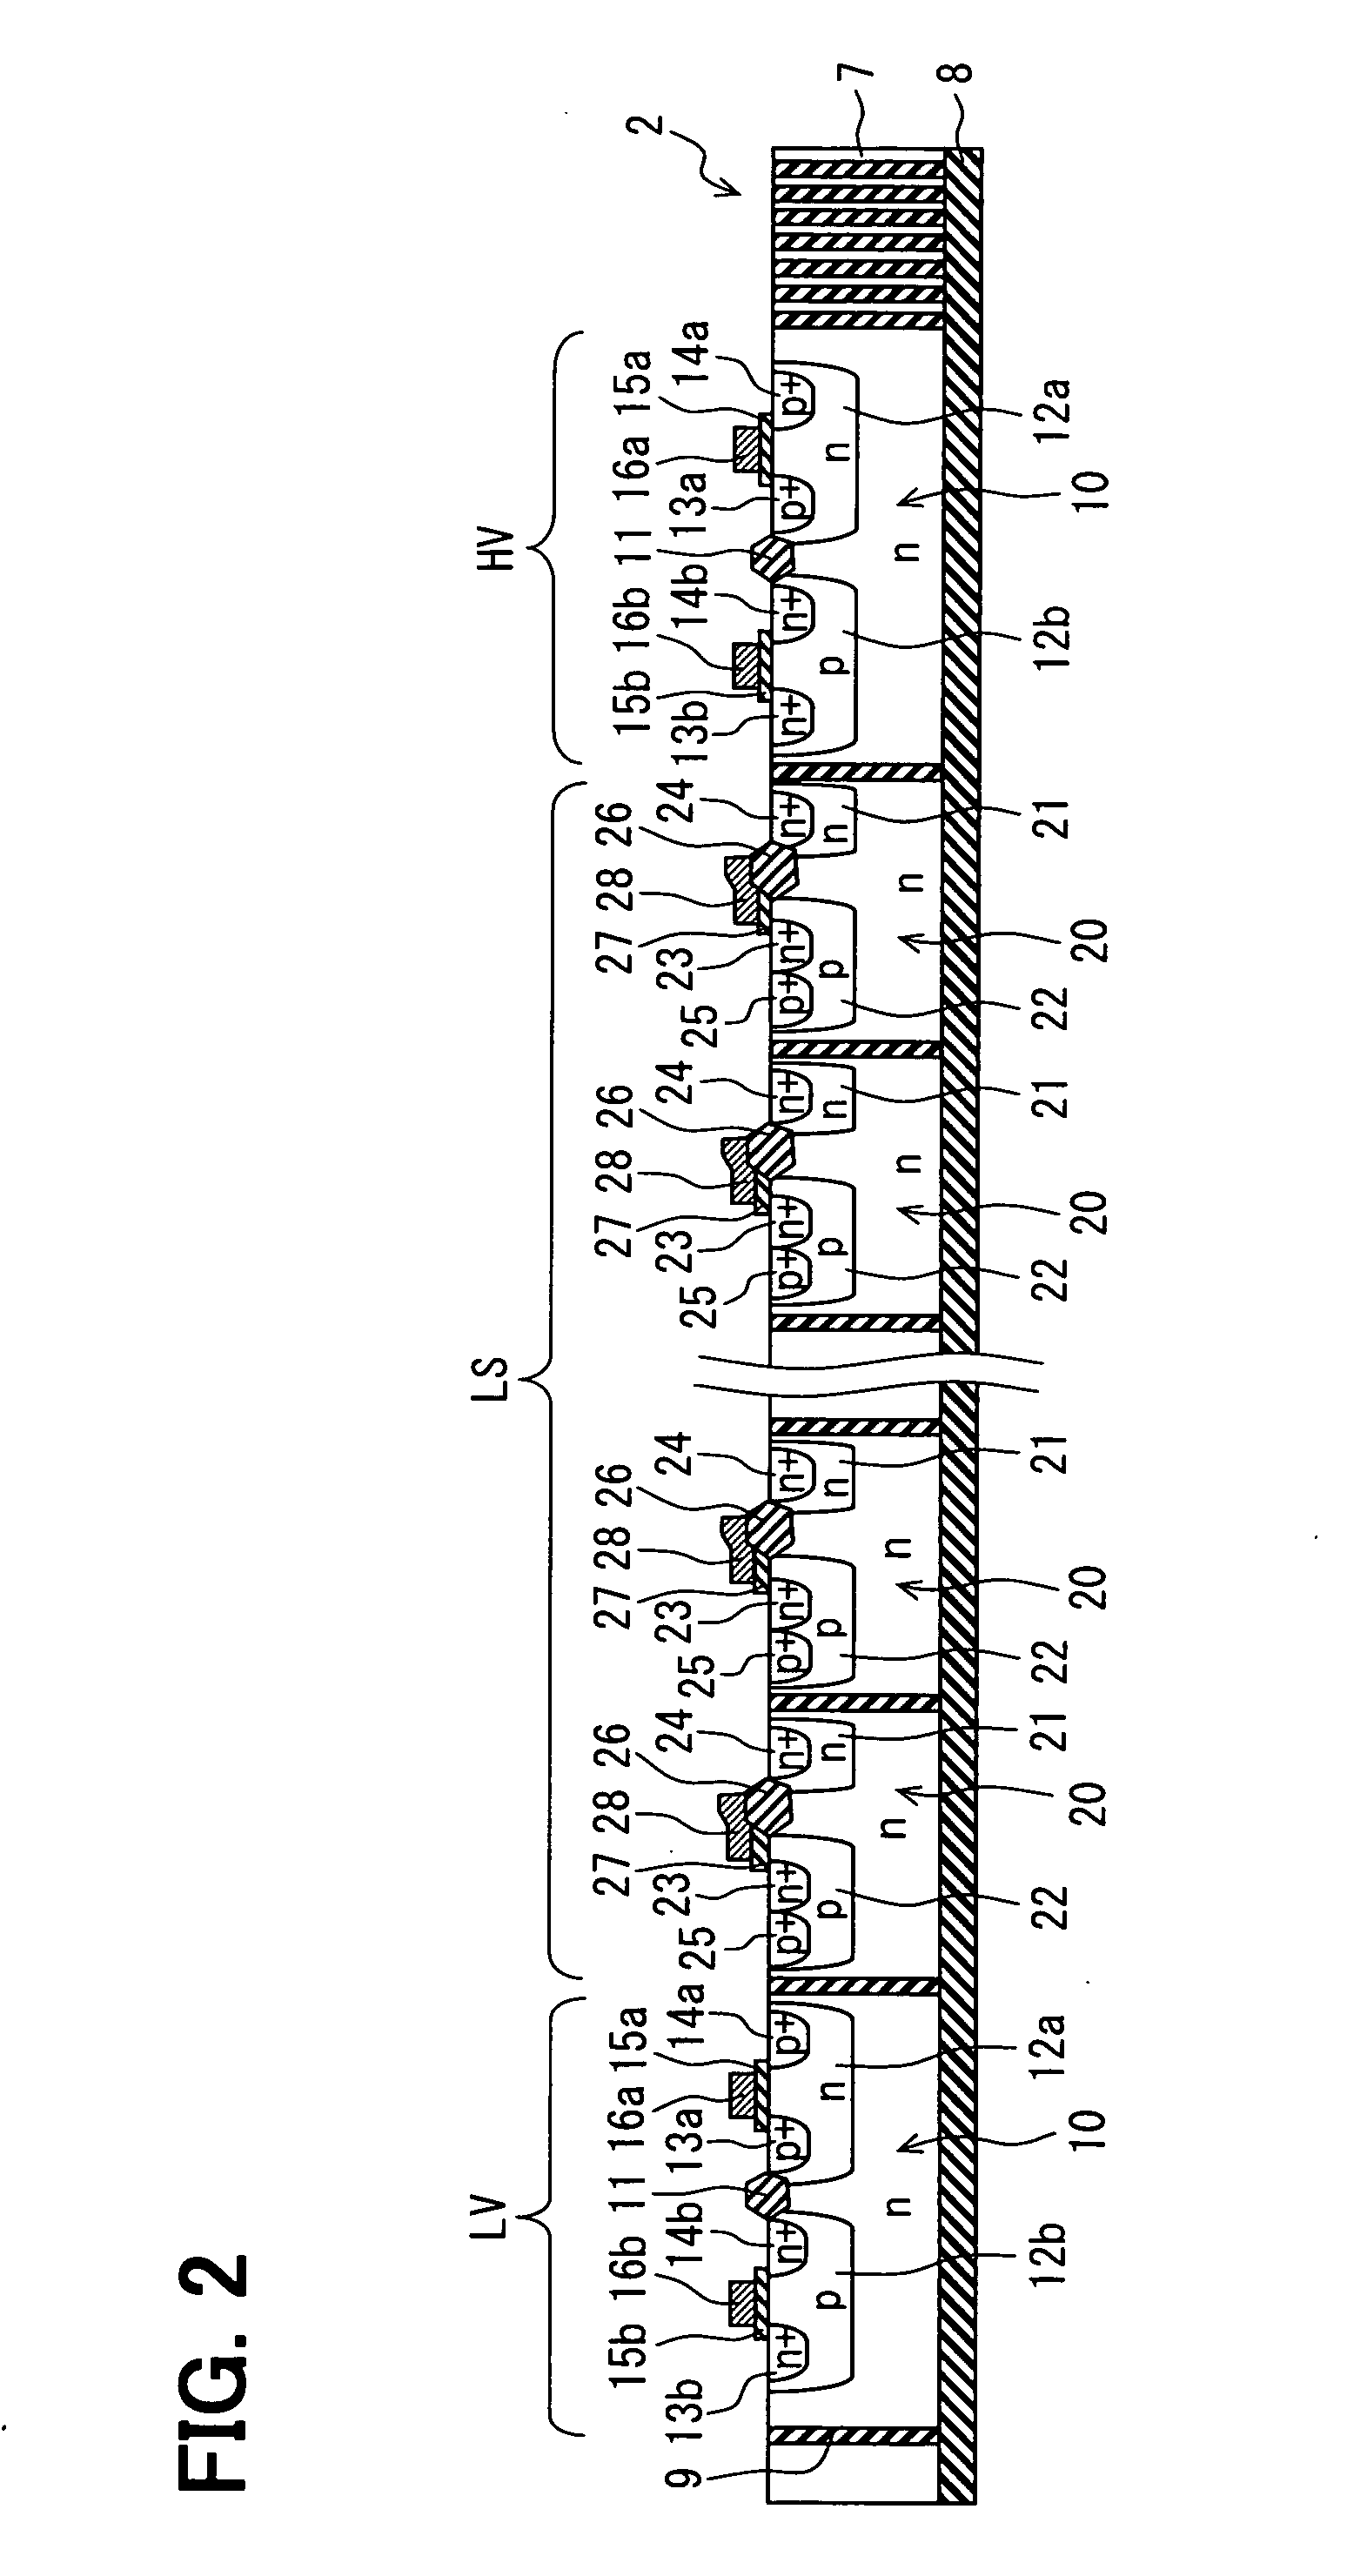 Semiconductor device, method for manufacturing the same, and multilayer substrate having the same